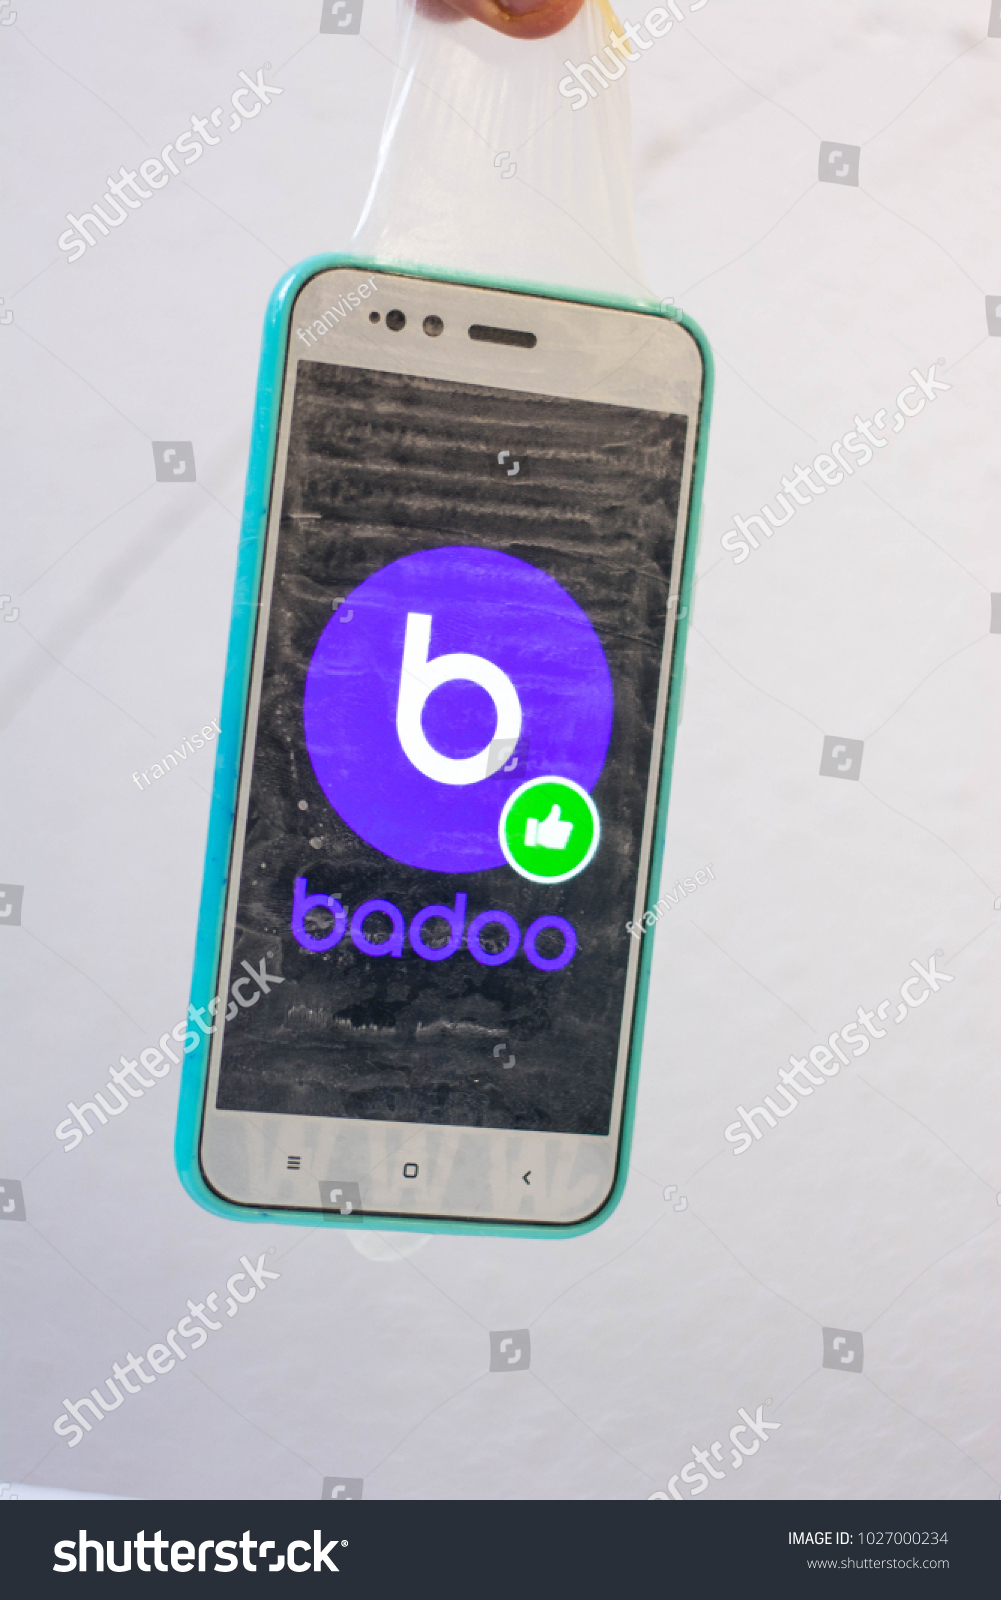 Badoo sign in with phone number